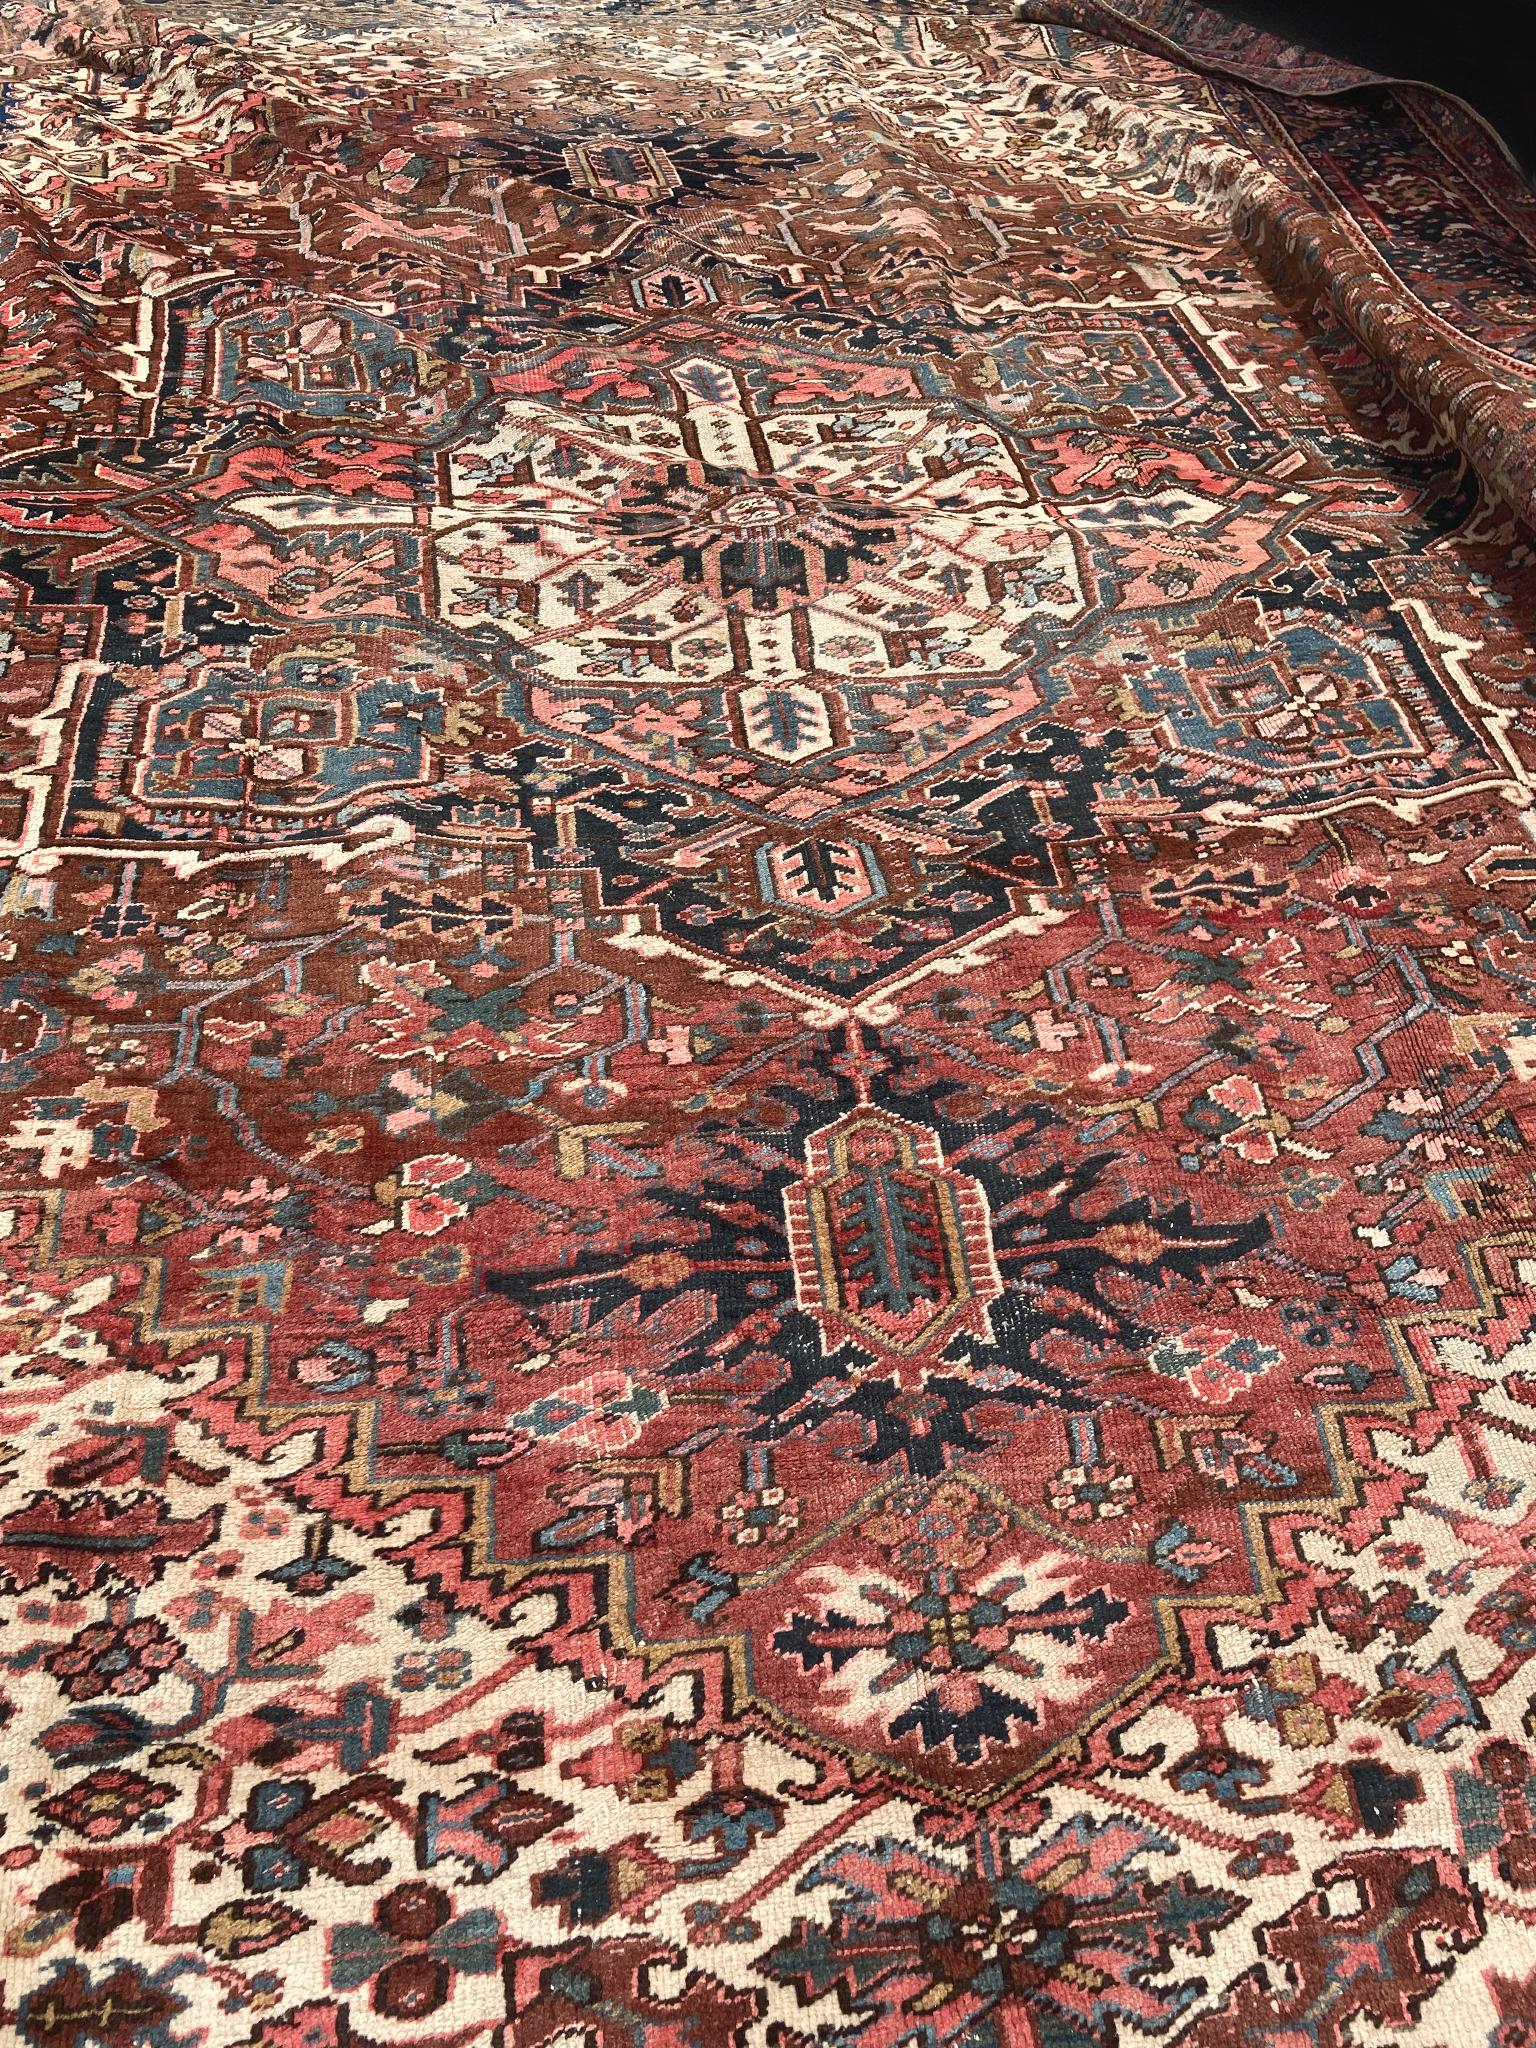 1930s Heriz rug with a rich palette of red, blue, and ivory hues. A large central medallion sits on a dark red field is surrounded by an ornate patterning of tree and vine motifs. This pattern repeats throughout, creating a lush composition.